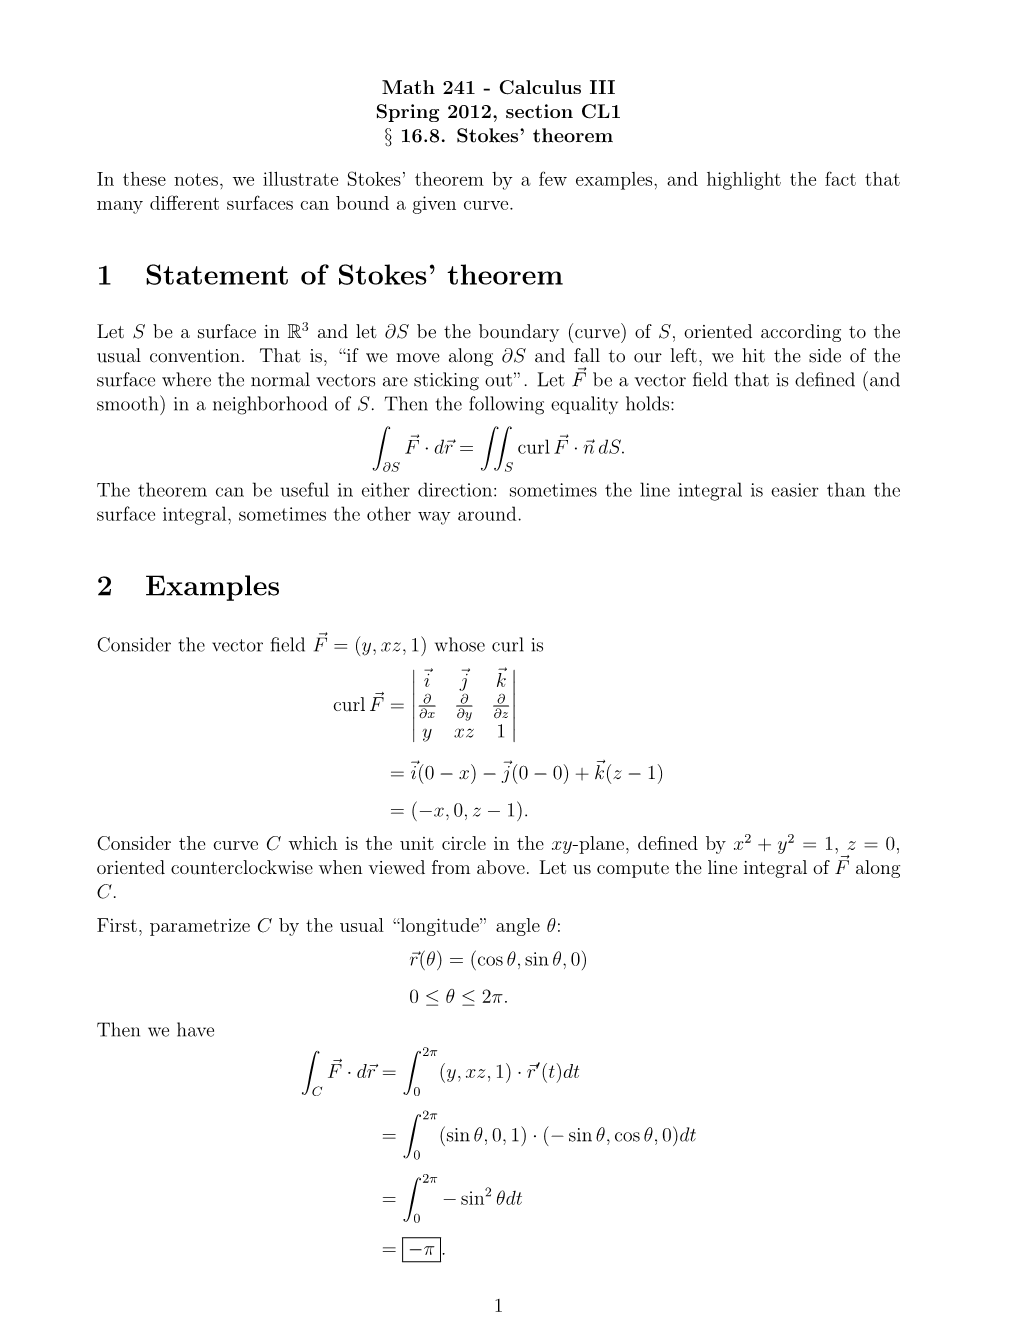 1 Statement of Stokes' Theorem 2 Examples